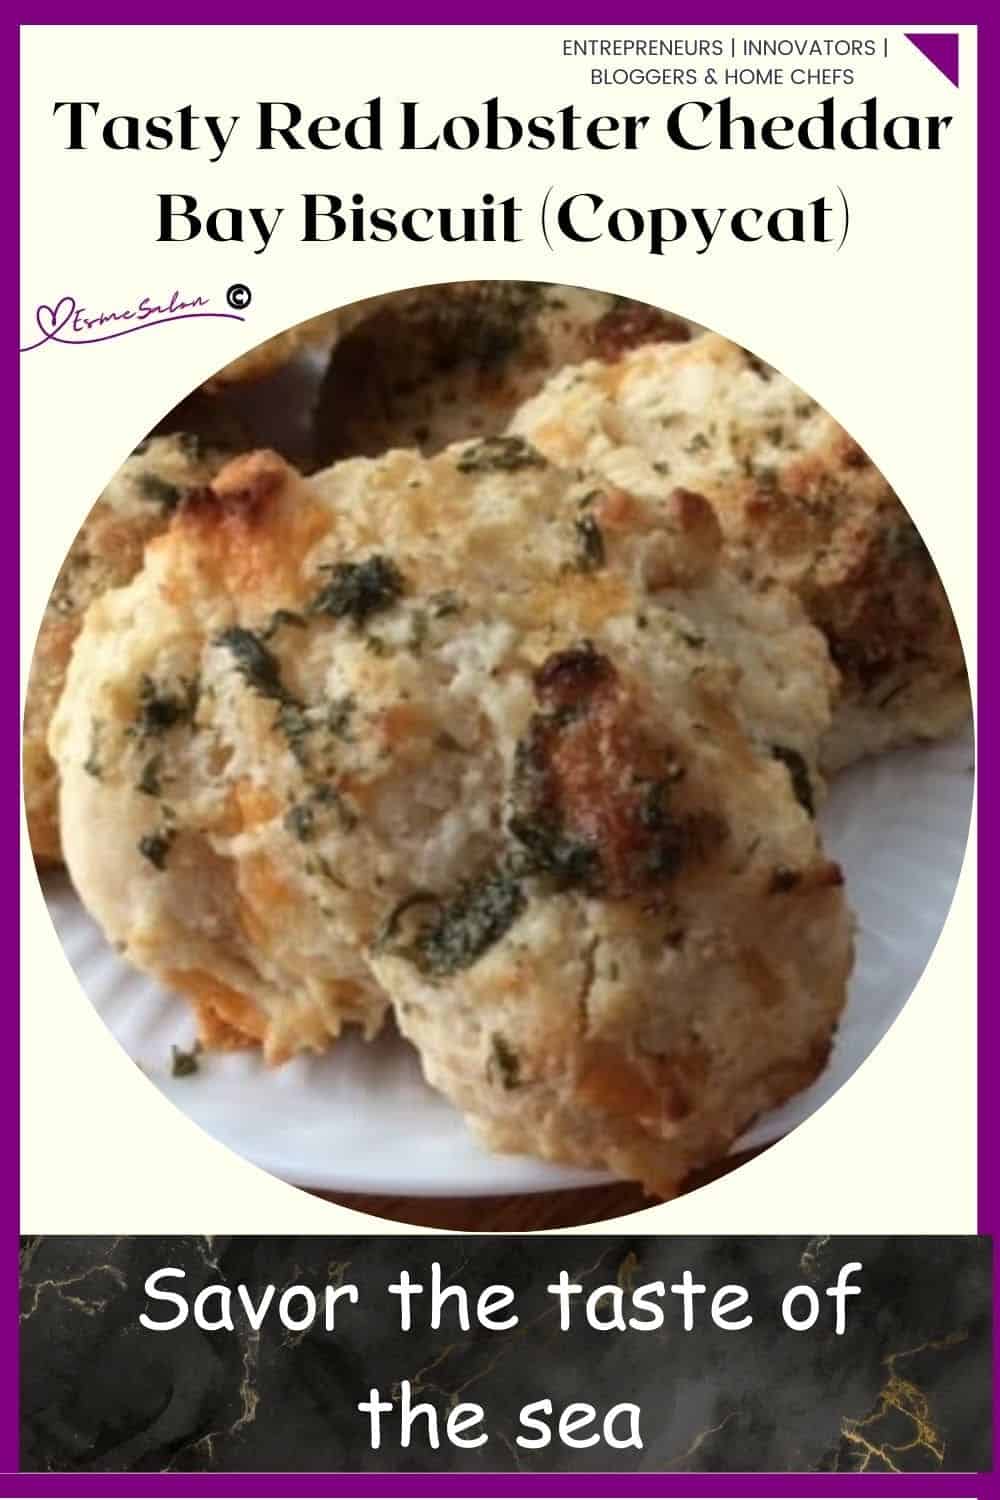 an image of Red Lobster Cheddar Bay Biscuit copycats